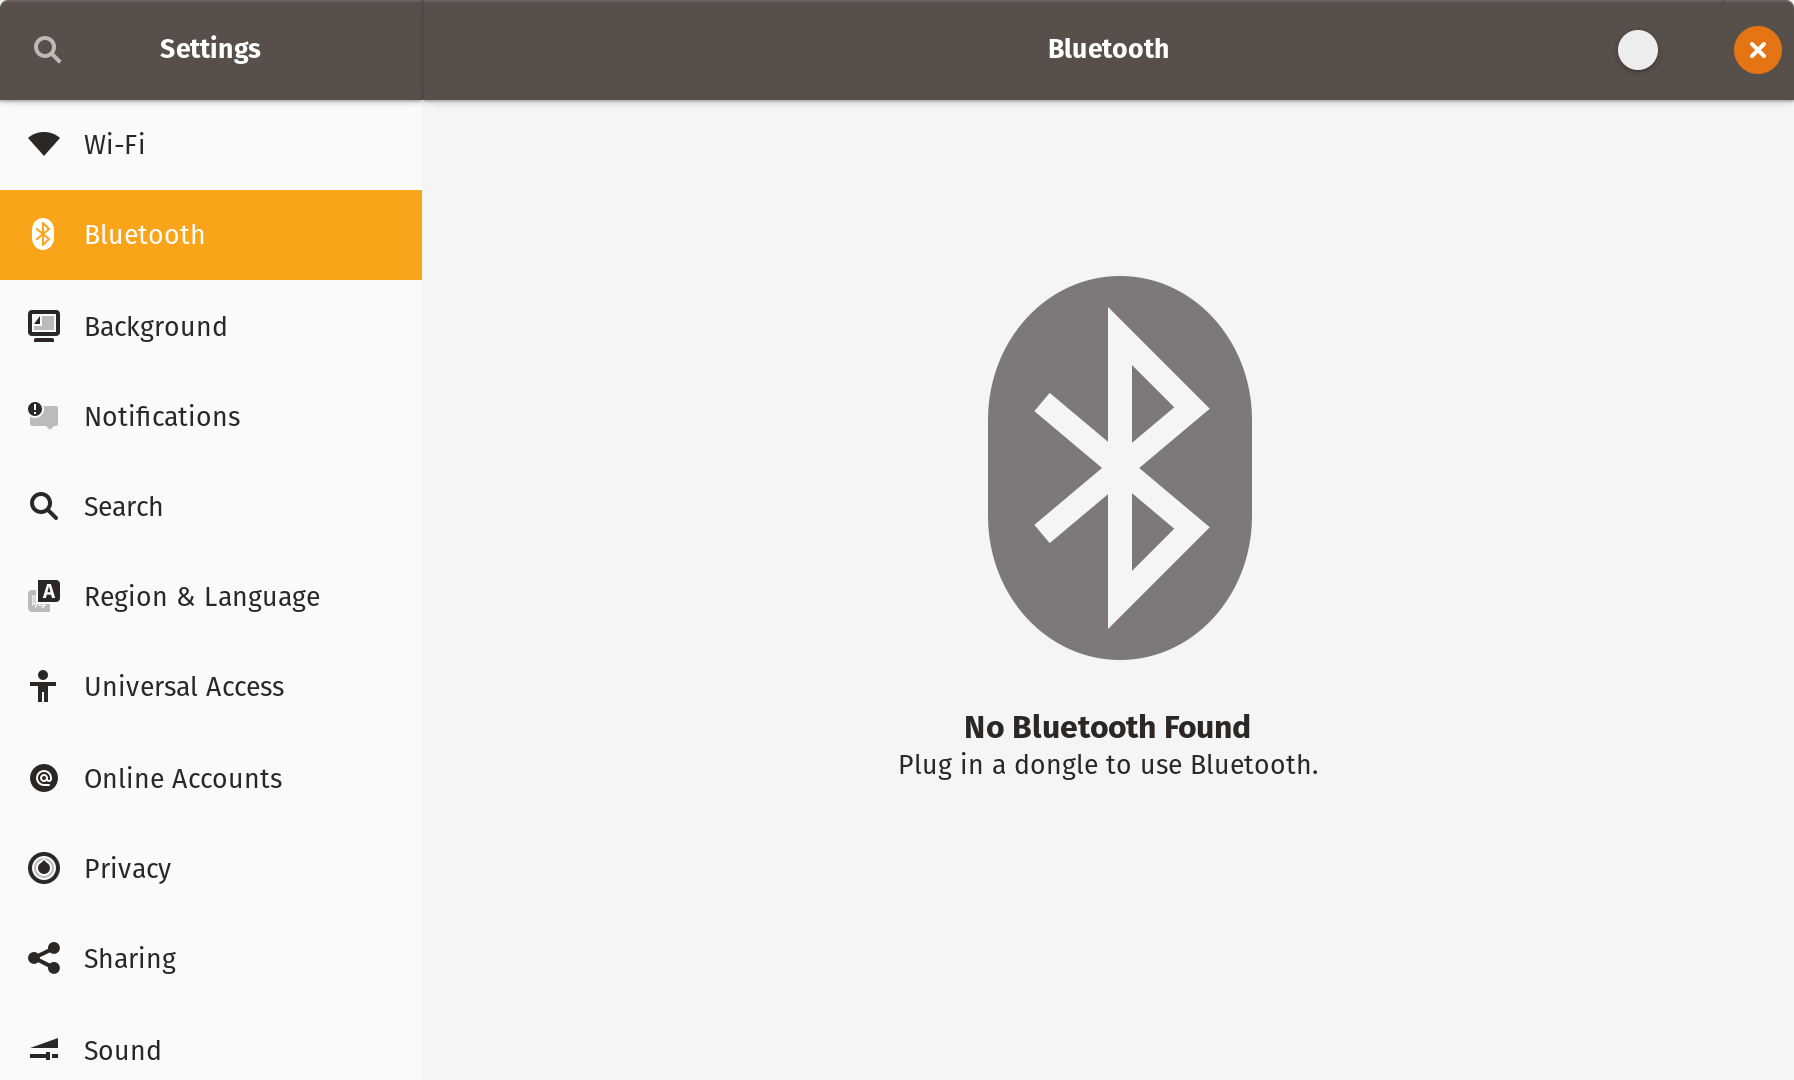 Use of Bluetooth Logo - Fix for “No Bluetooth Found” error after wake from sleep